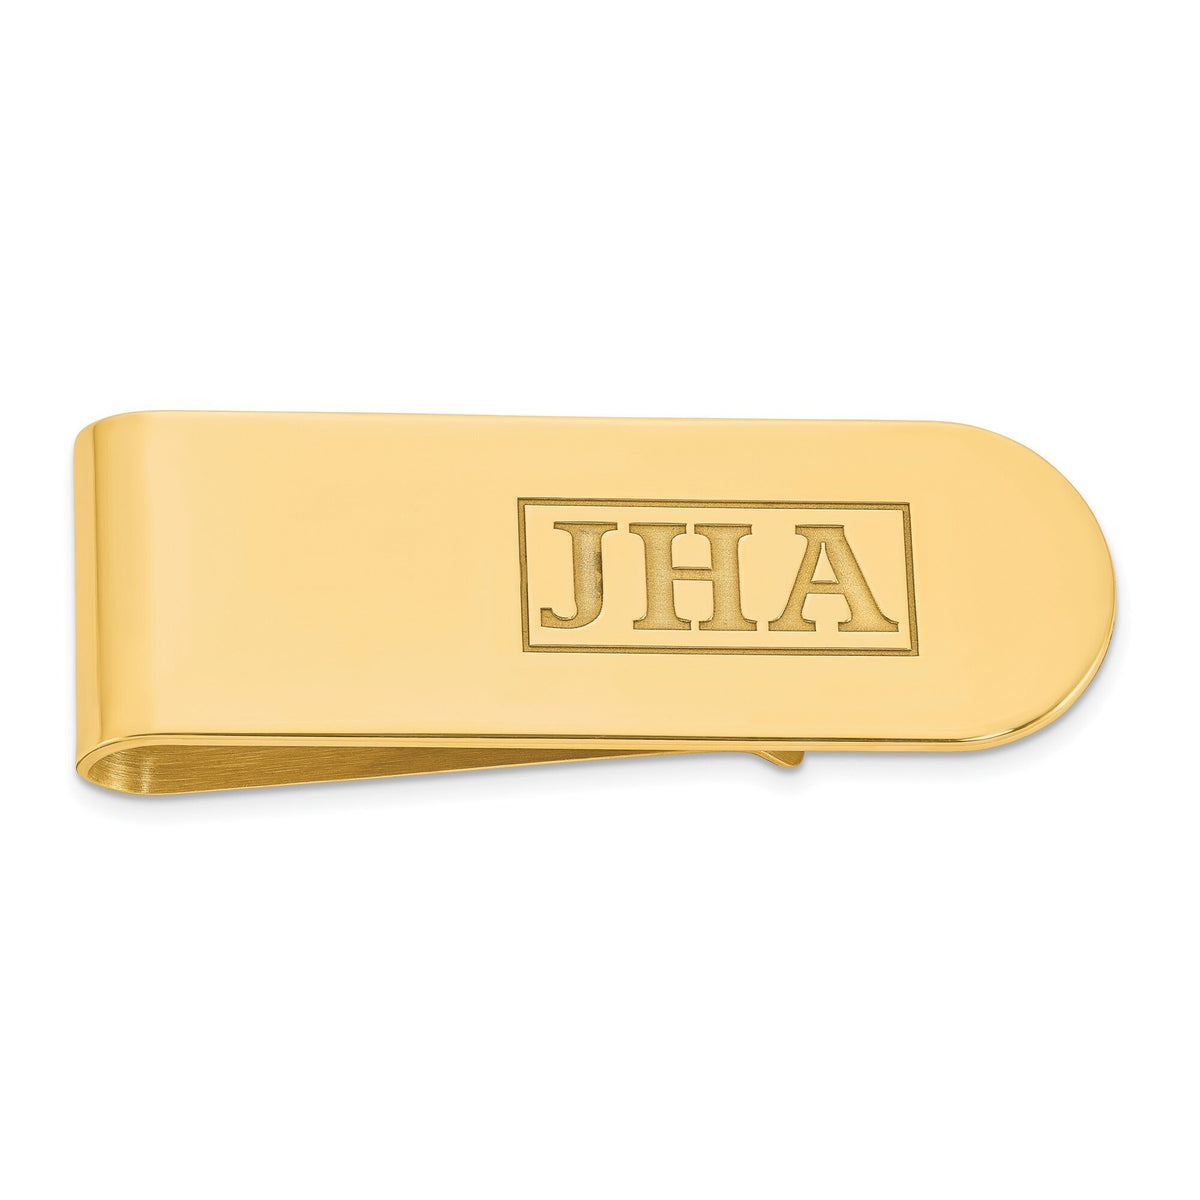 Personalized Monogram Money Clip -Solid 14k Yellow or White Gold, Sterling Silver , & Gold Plated (28 Grams ) - Best Seller - MADE IN USA